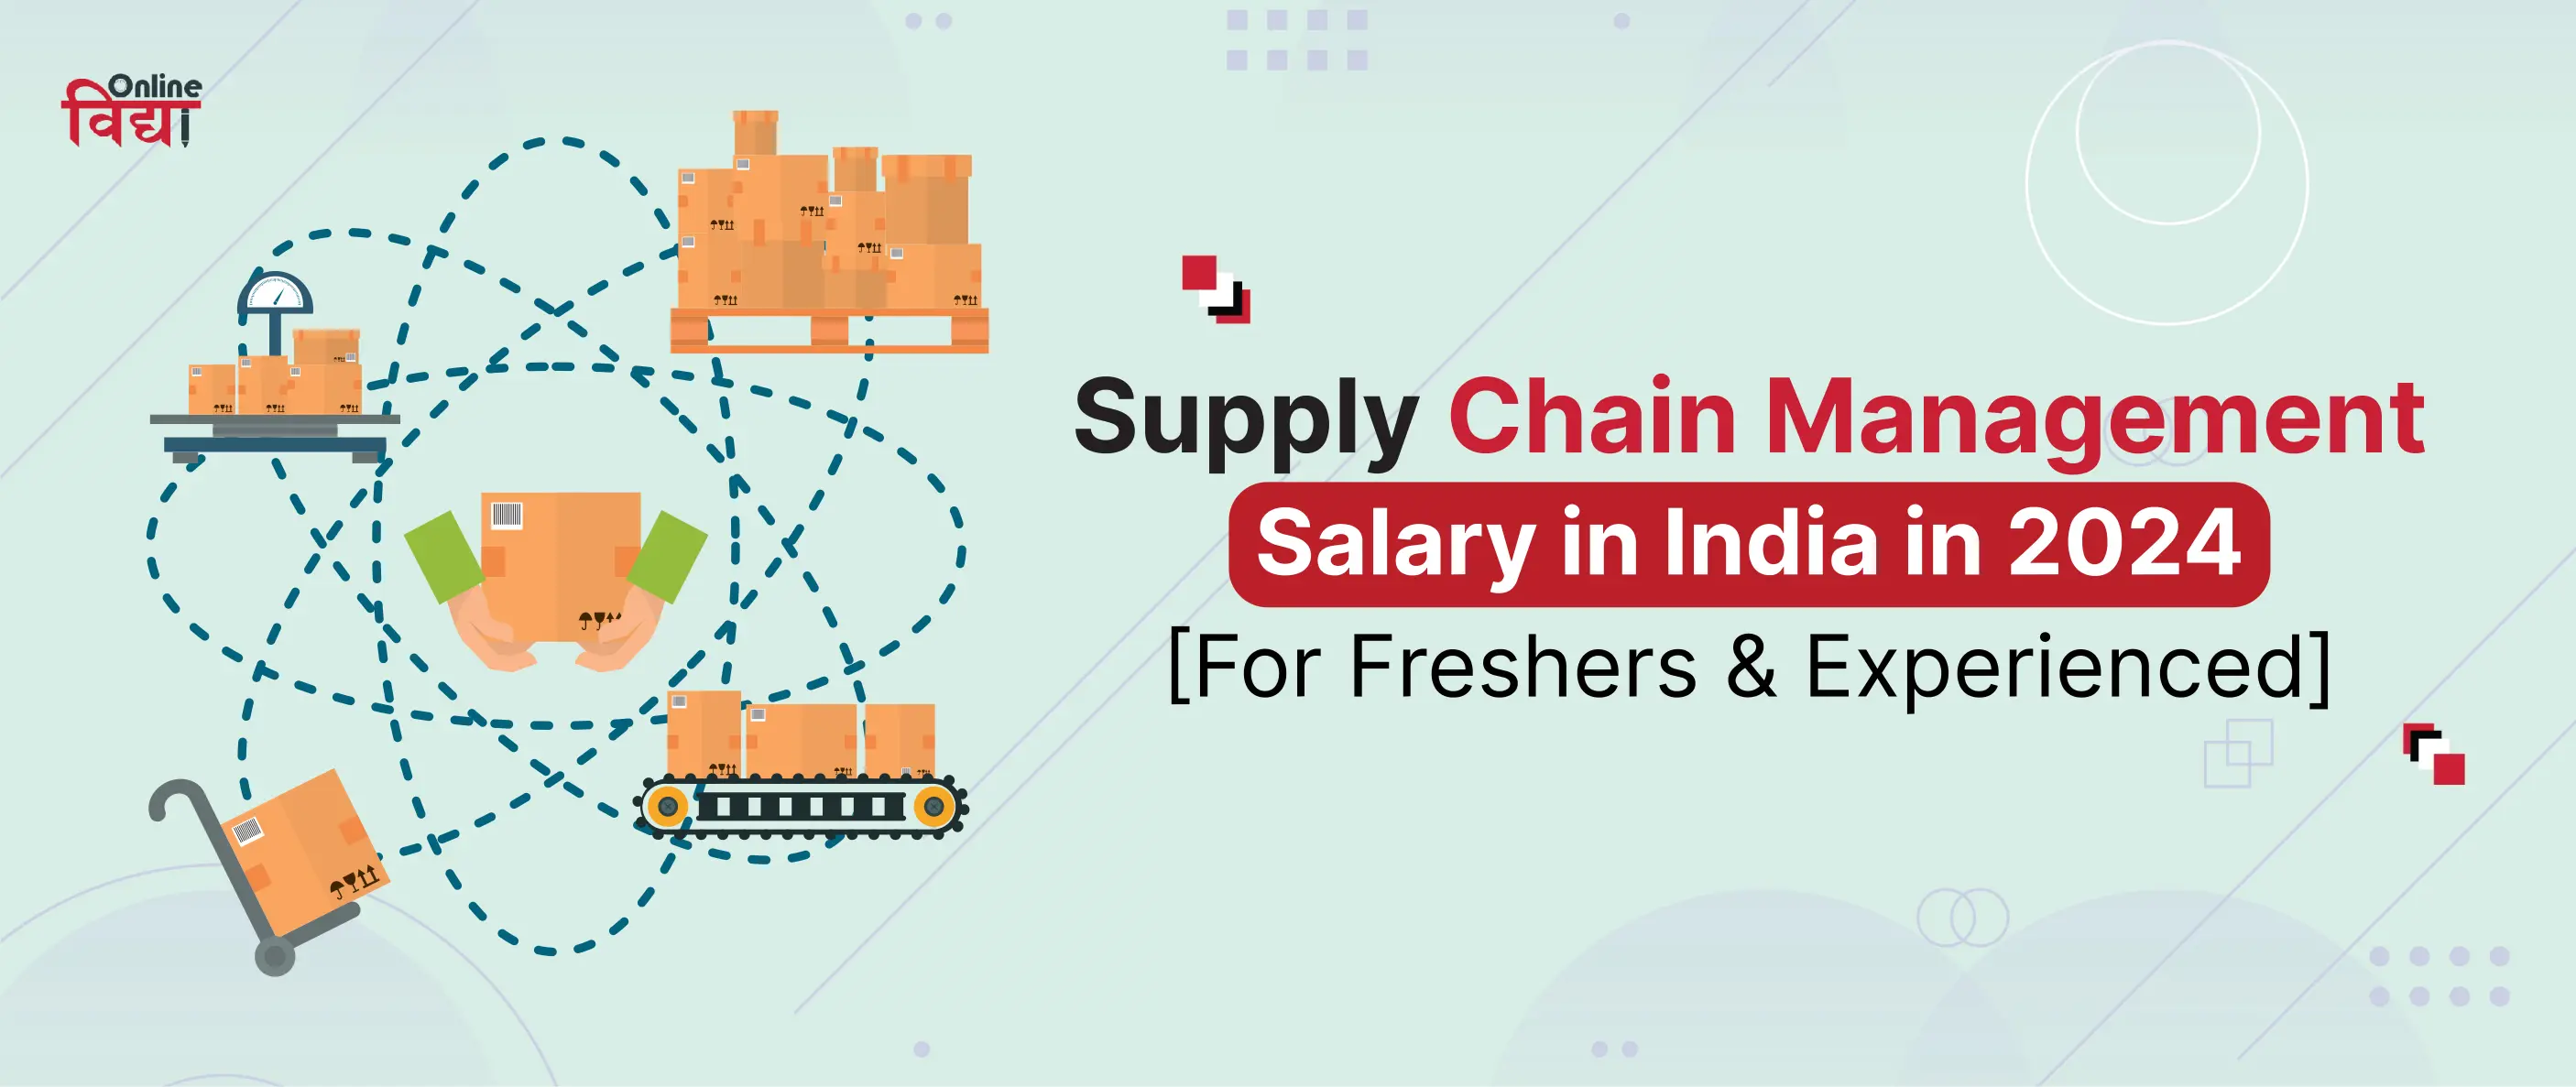 Supply Chain Management Salary in India in 2024 [For Freshers & Experienced]